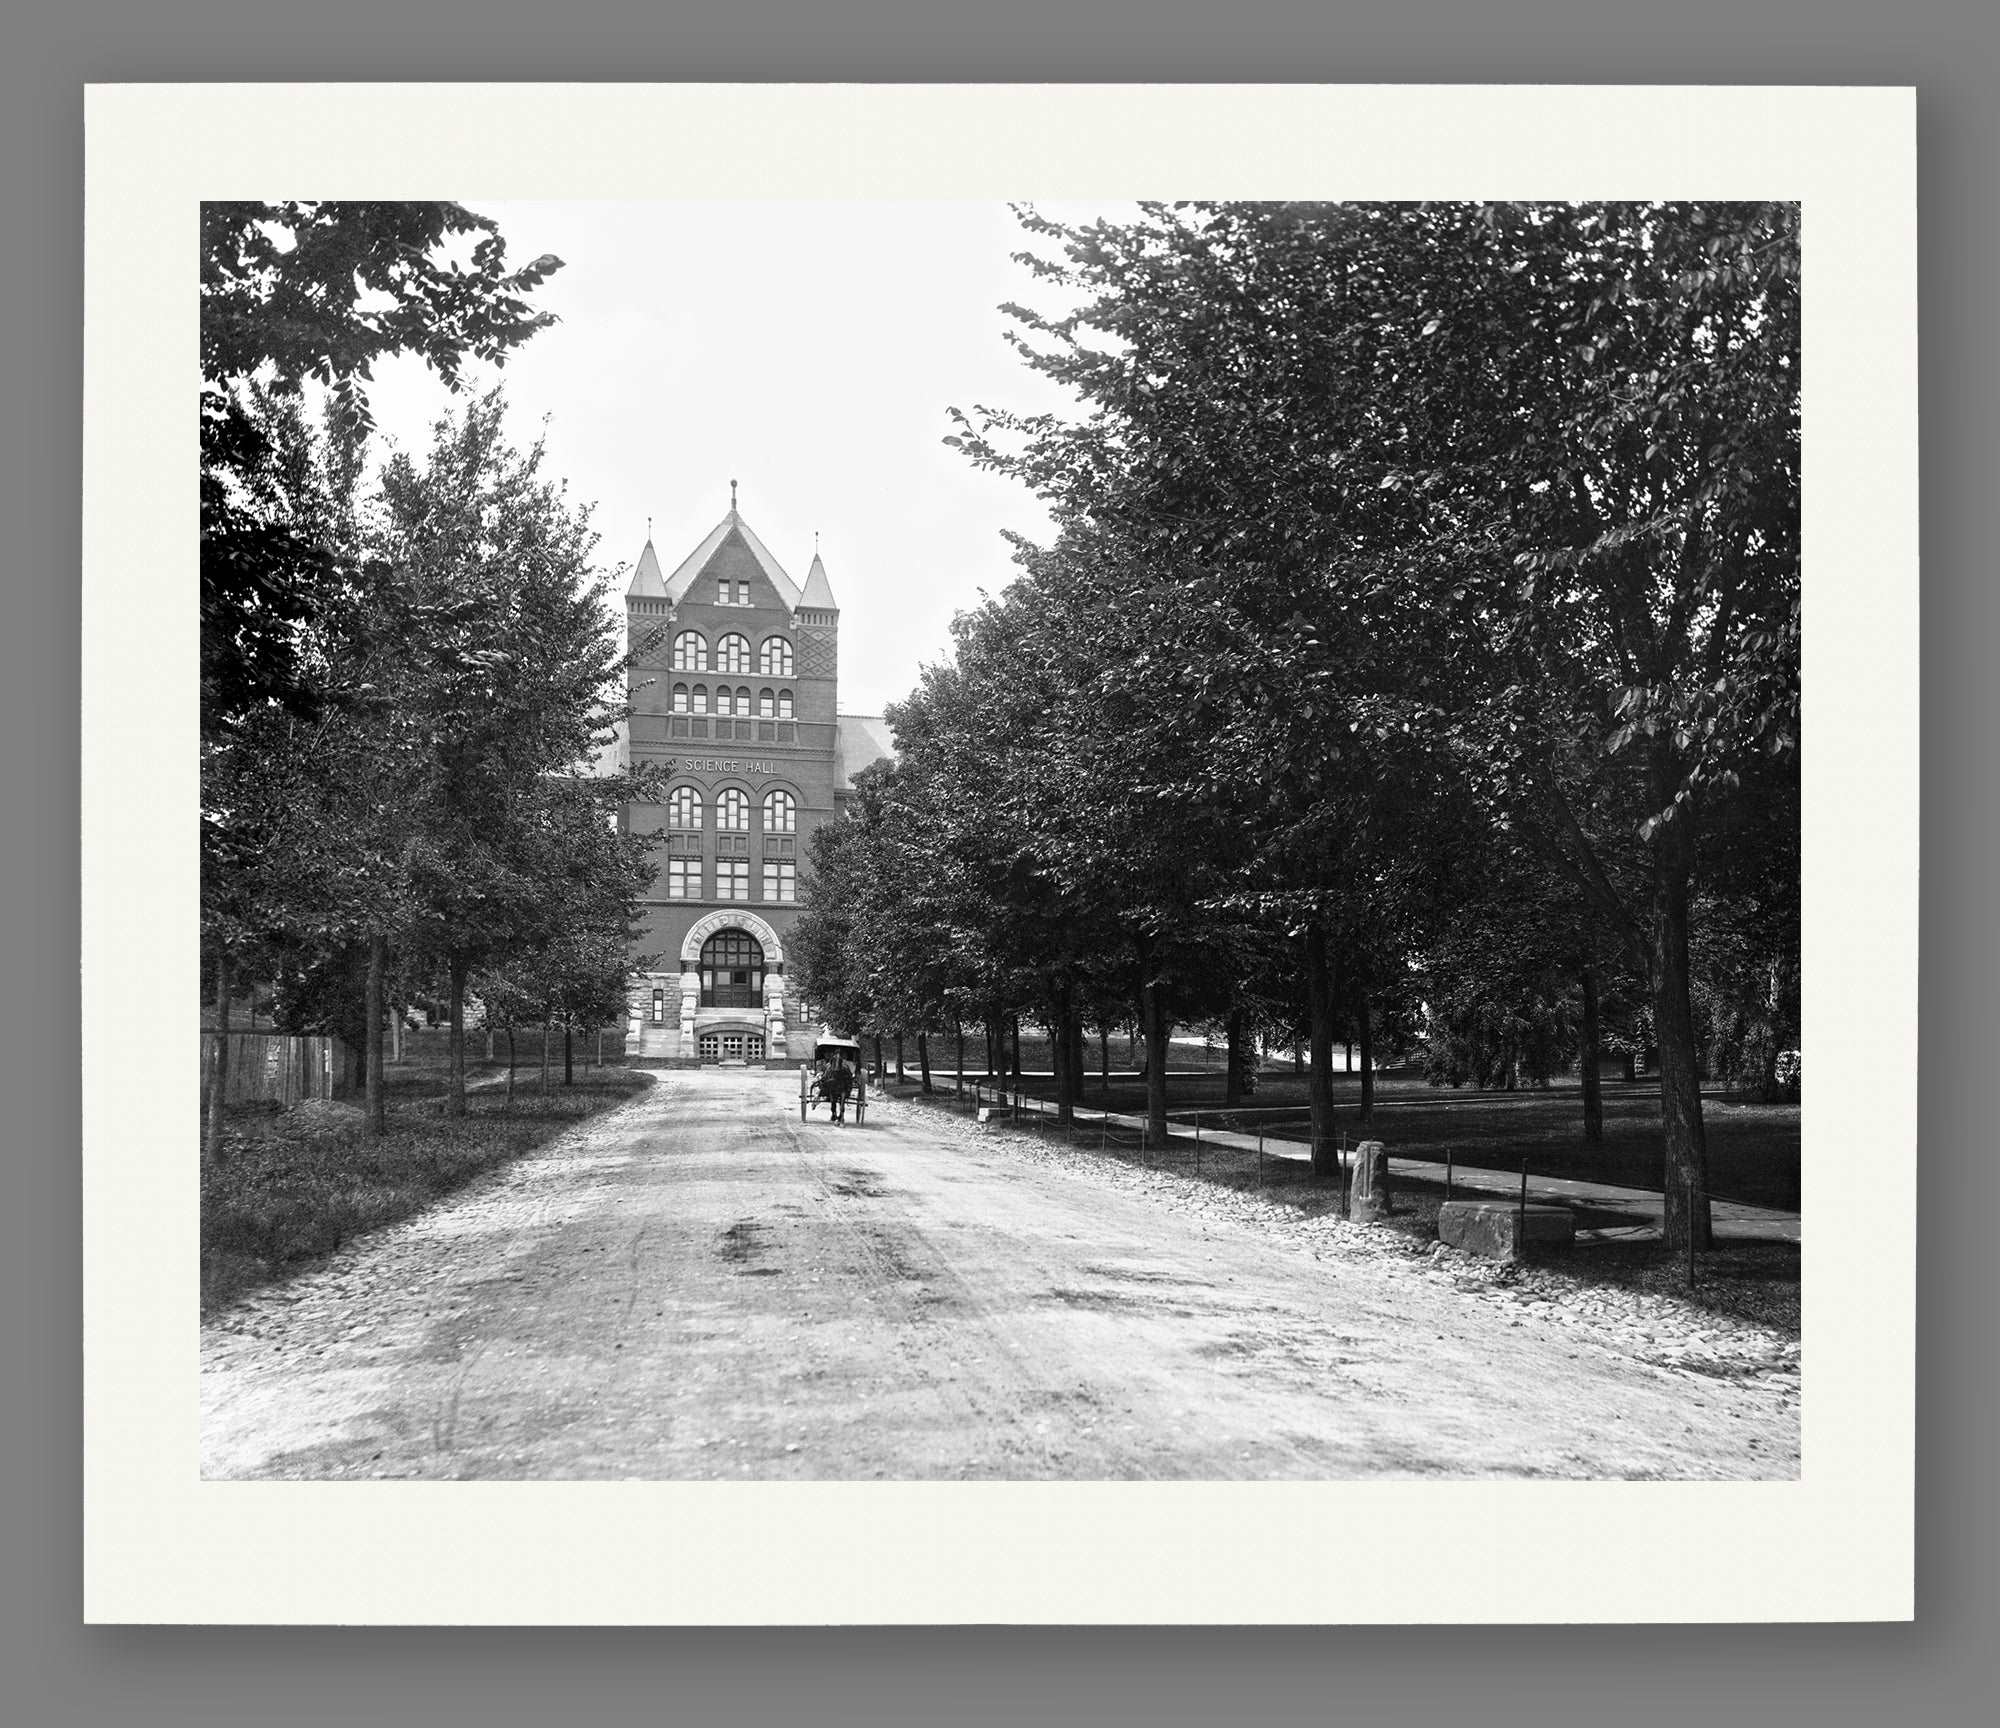 A museum quality paper print reproduction of a historic photograph of the University of Wisconsin campus